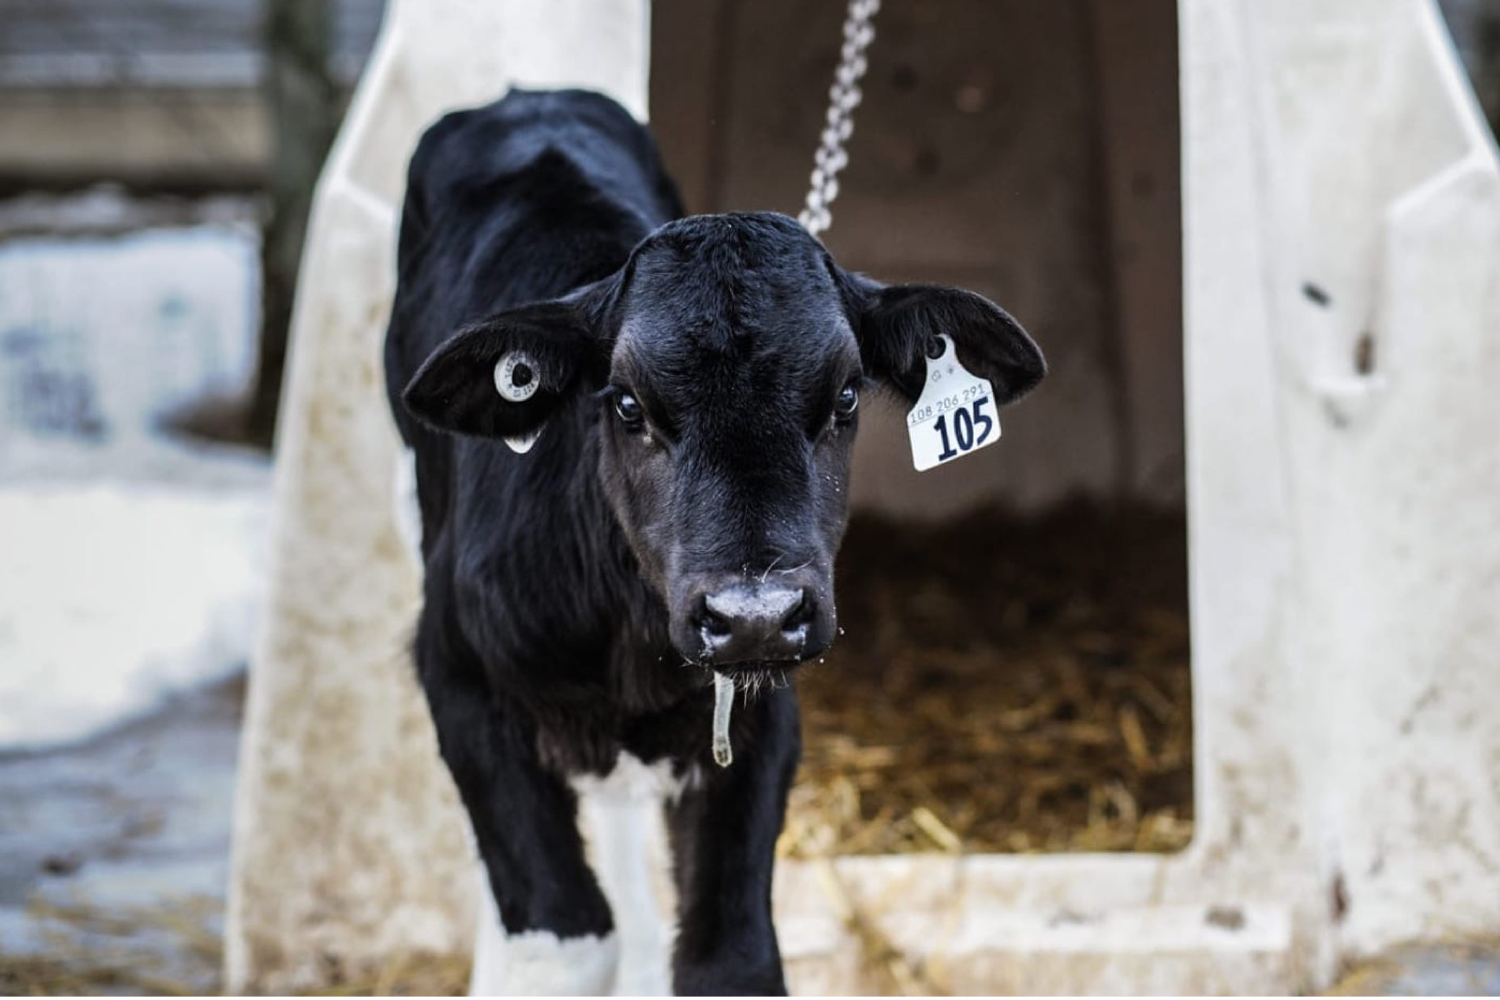 Dairy calf chained to a hutch